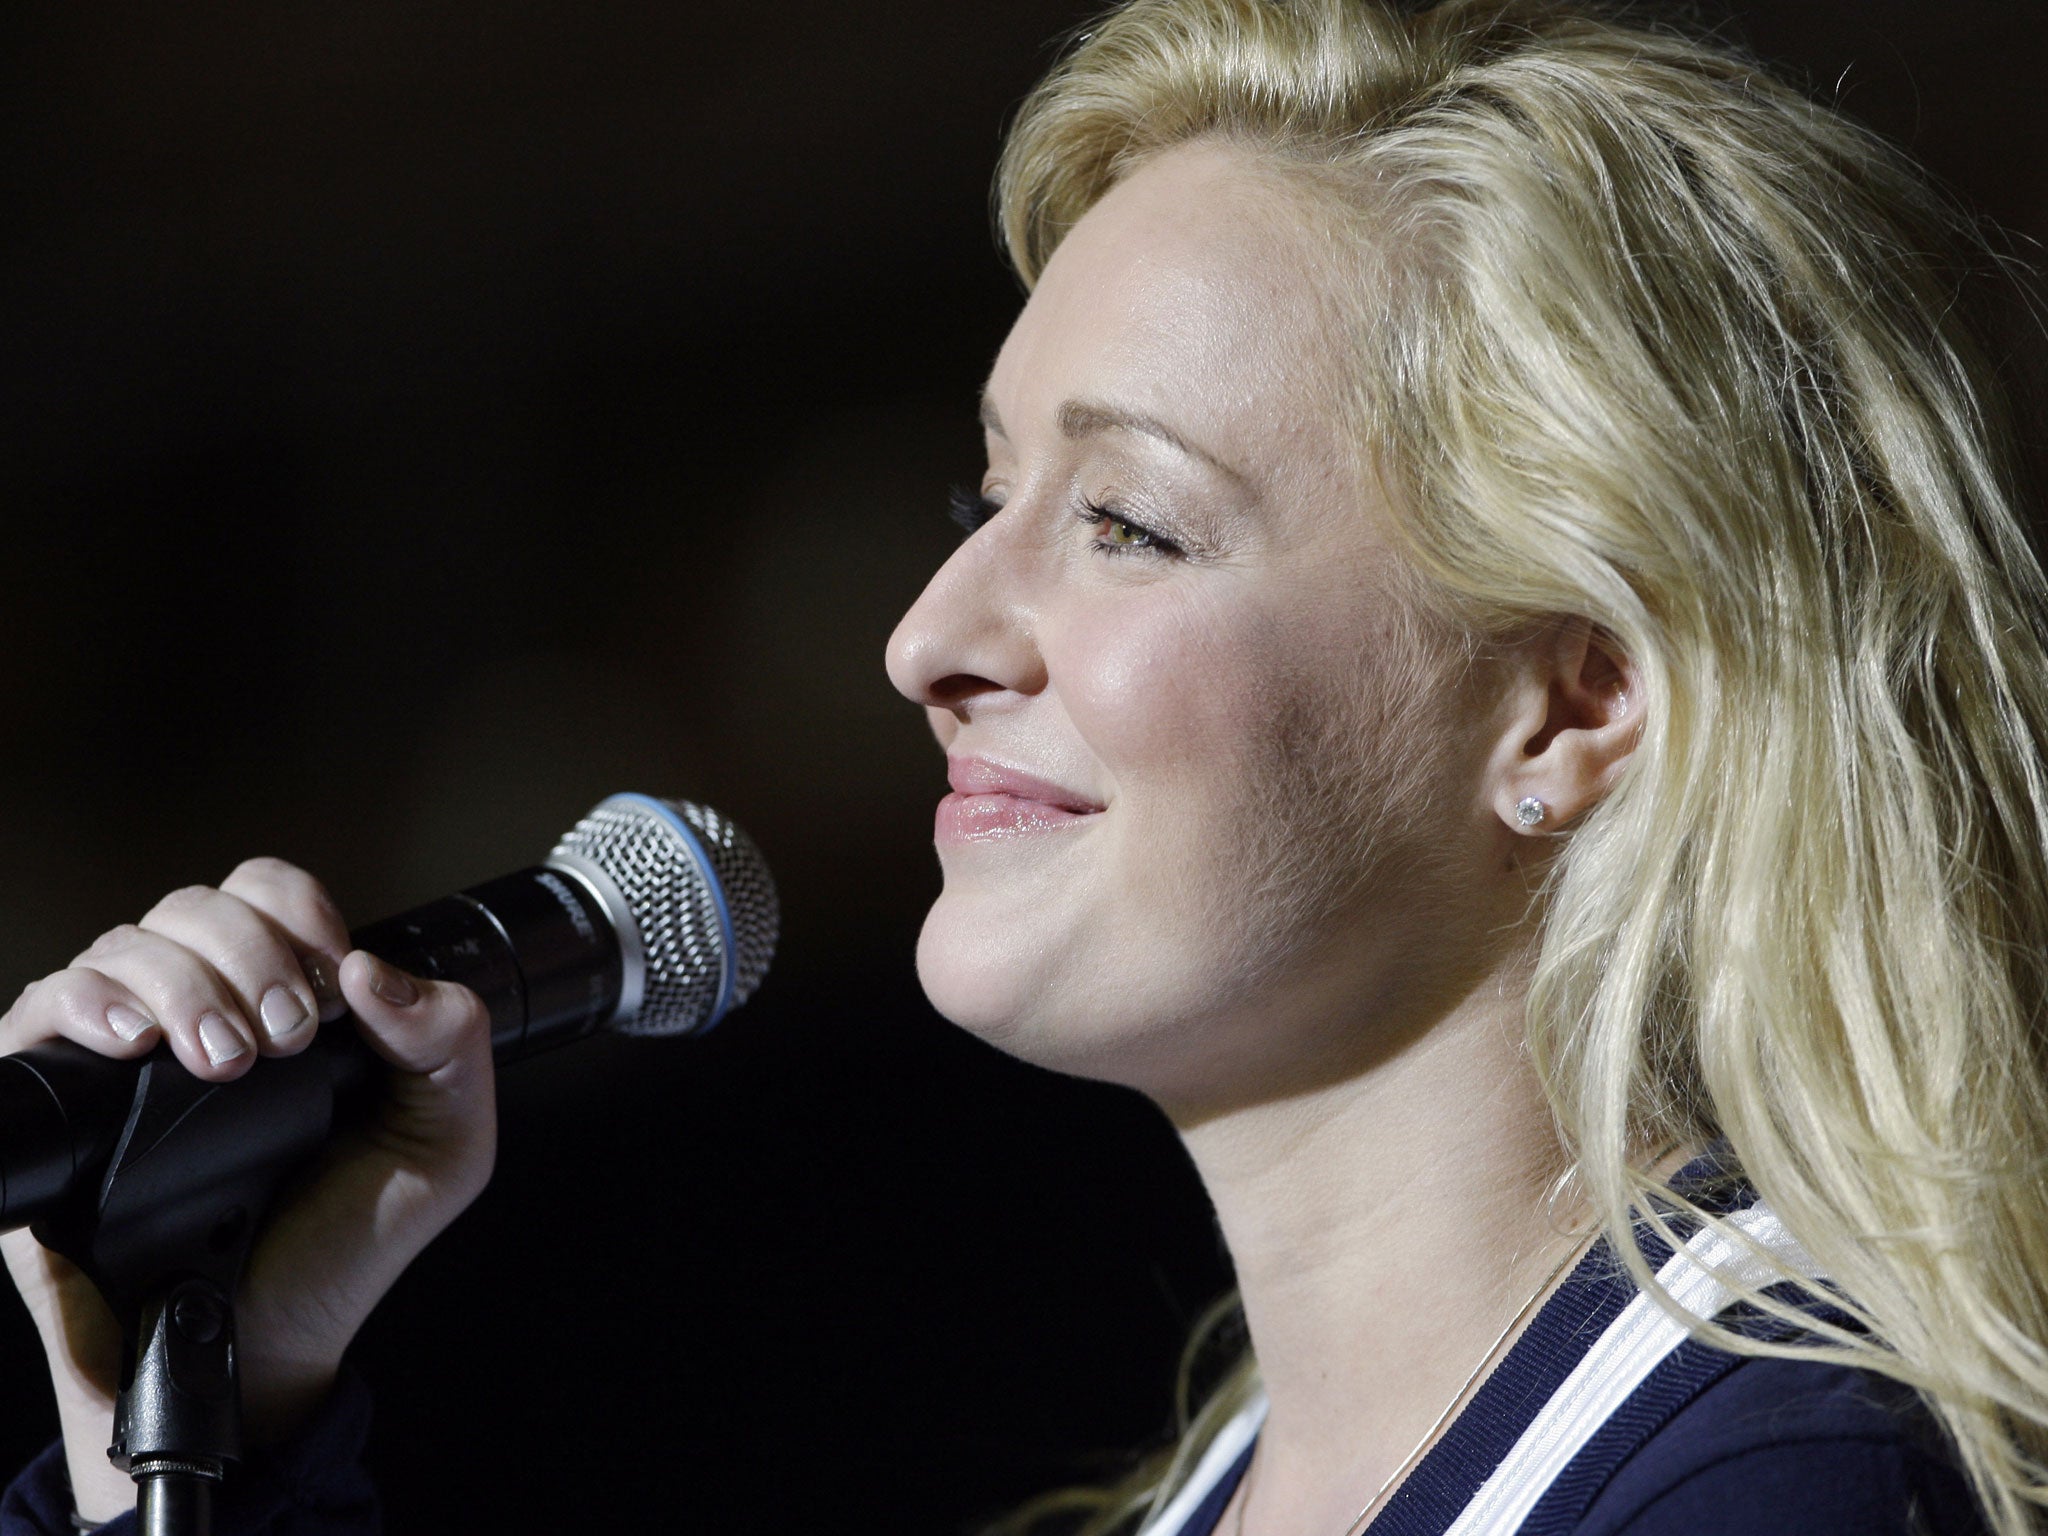 Troubled country singer Mindy McCready was found dead with an apparent self-inflicted gunshot wound